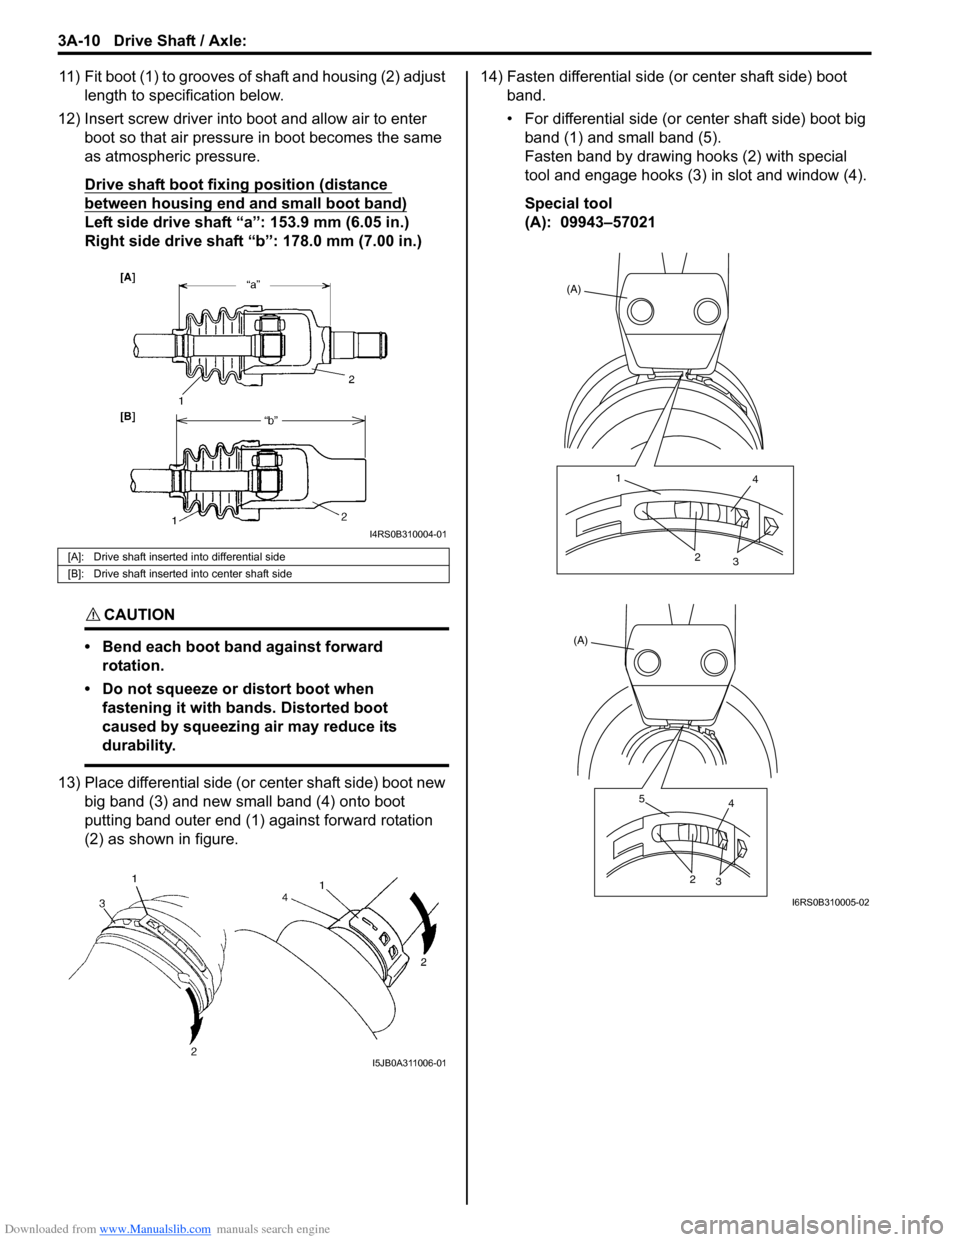 SUZUKI SWIFT 2006 2.G Service Workshop Manual Downloaded from www.Manualslib.com manuals search engine 3A-10 Drive Shaft / Axle: 
11) Fit boot (1) to grooves of shaft and housing (2) adjust 
length to specification below.
12) Insert screw driver 